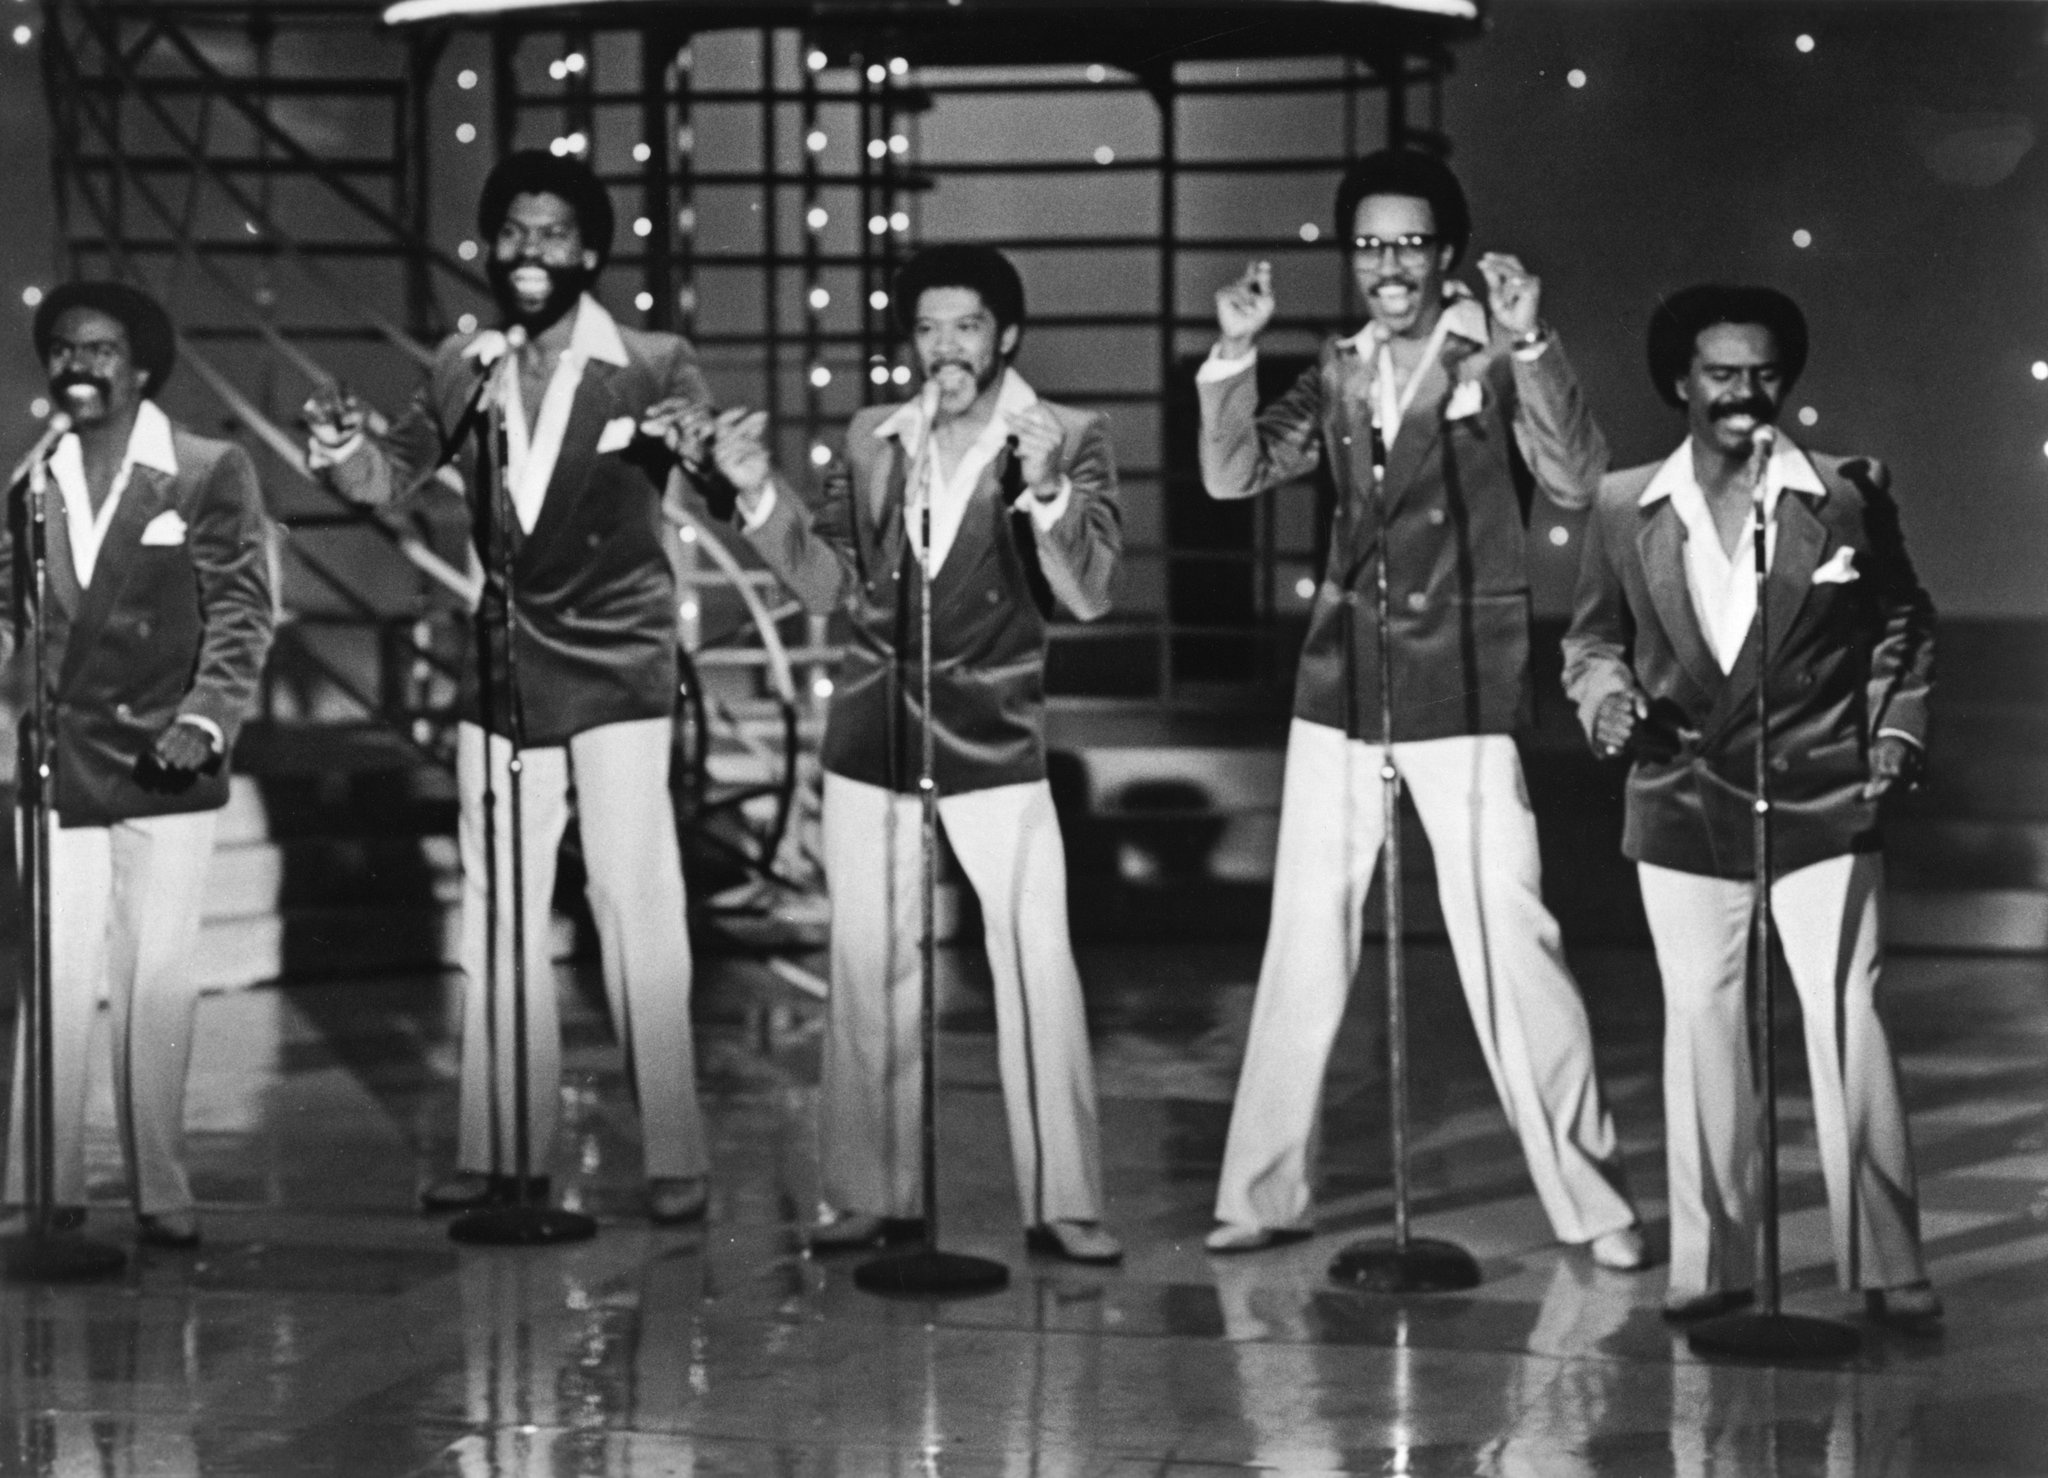 Nicholas Caldwell of the Whispers Dies at 71 - The New York Times